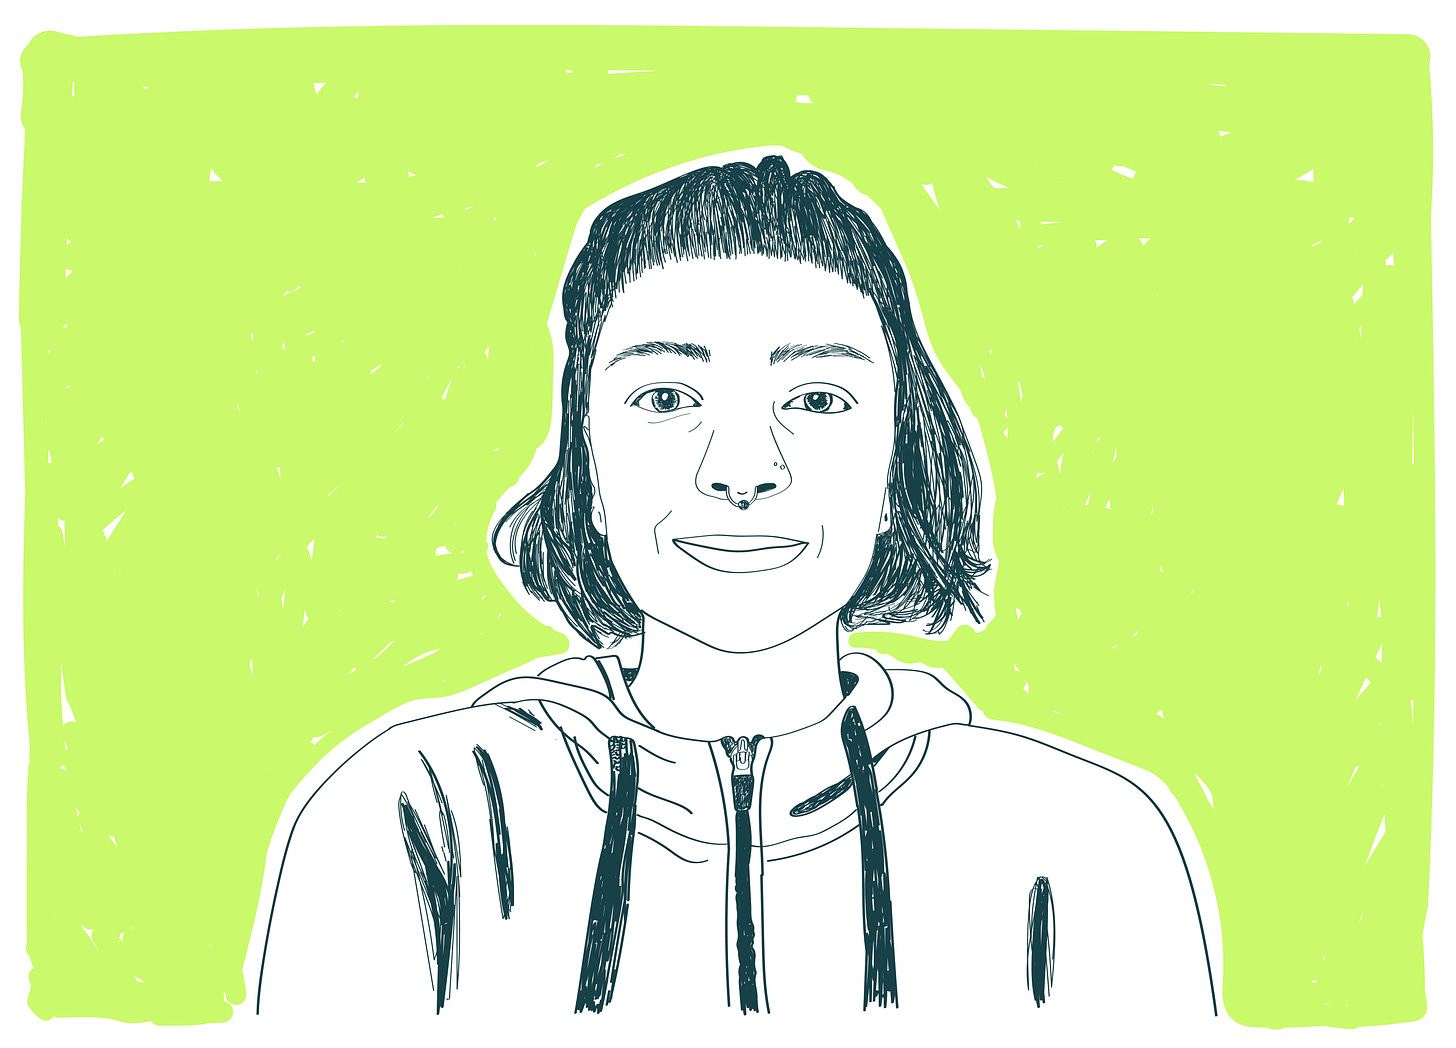 Black and white pencil sketch of Fyn, a white person with chin-length hair and a short fringe with a septum piercing. Fyn is wearing a hoodie. Background is lime green